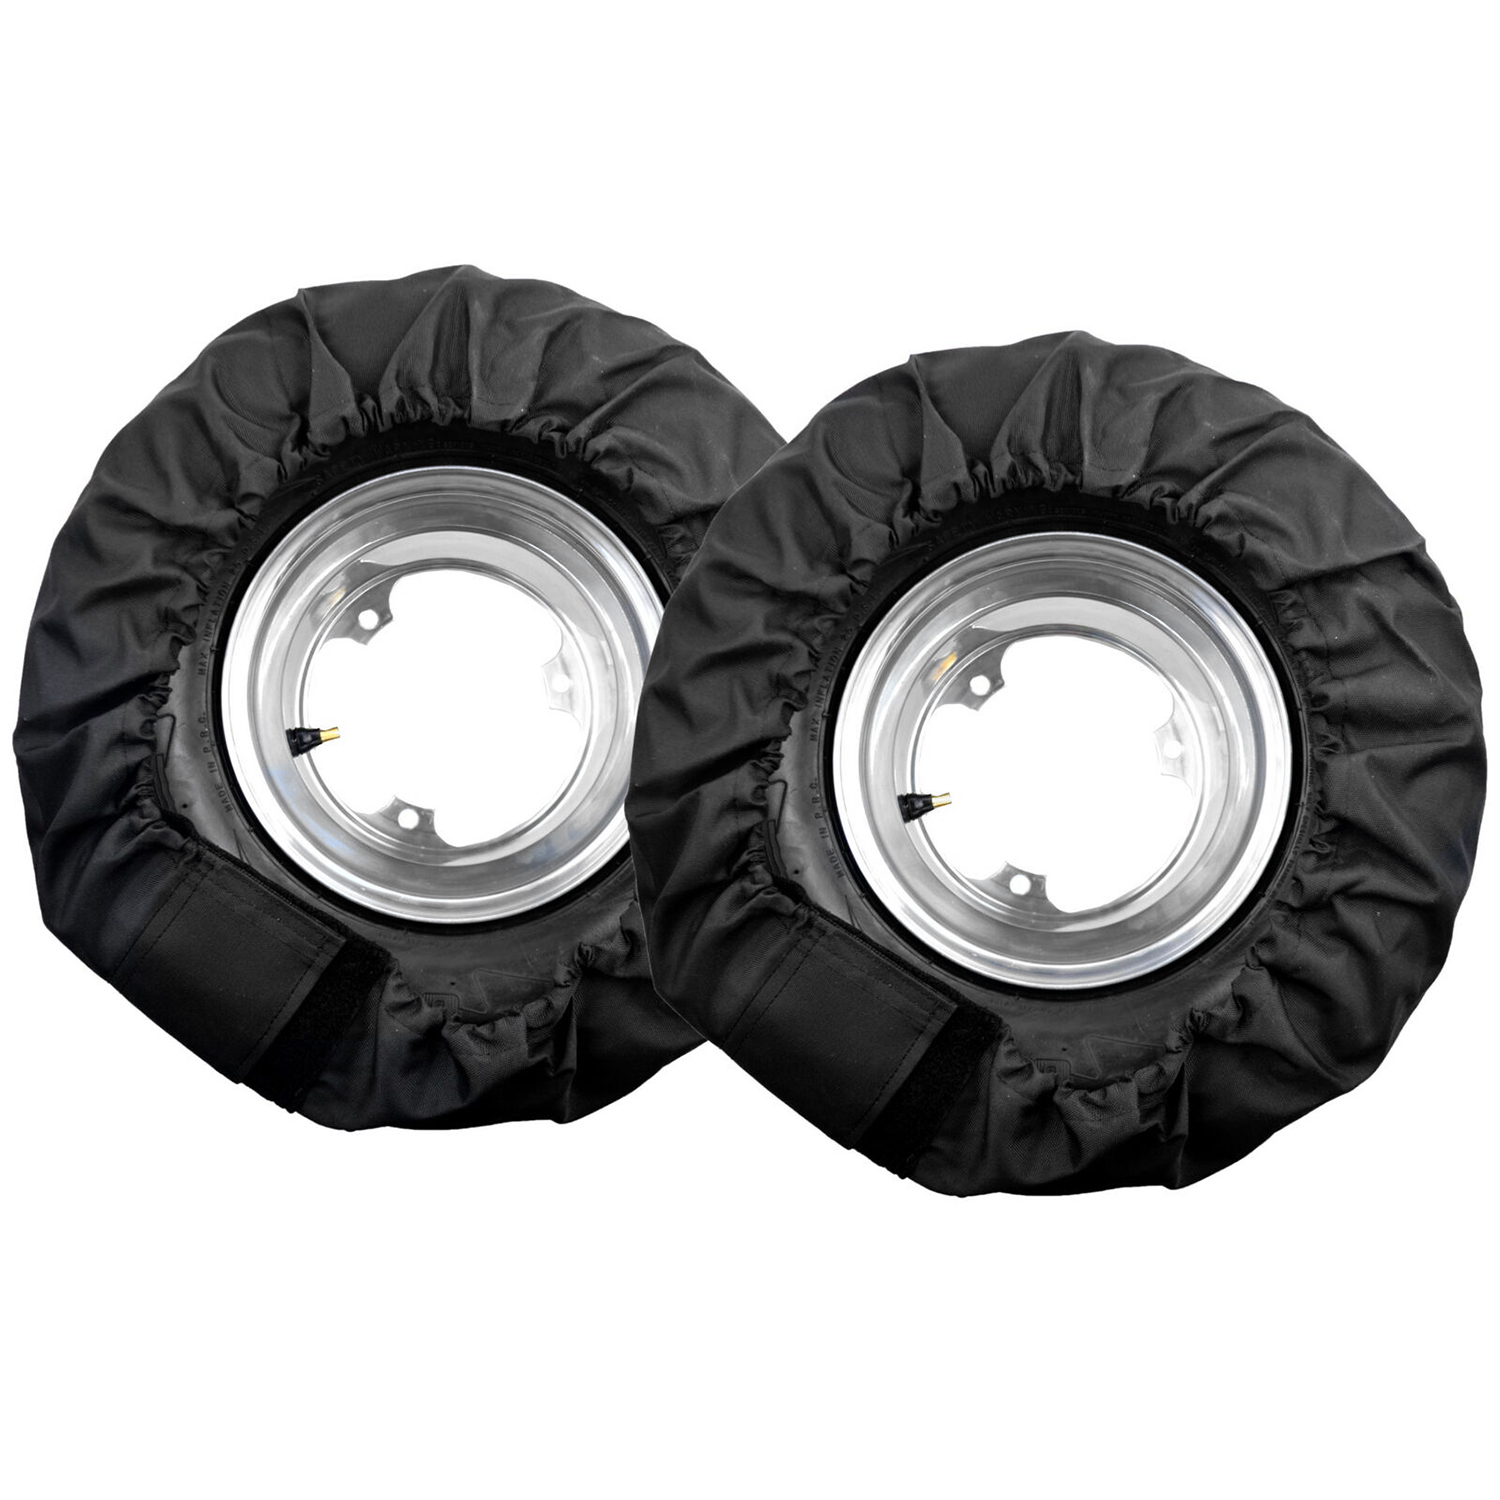 660 PRO REAR TIRE COVERS (18"x8" - FITS 53"-56" ROLLOUT) (PAIR)